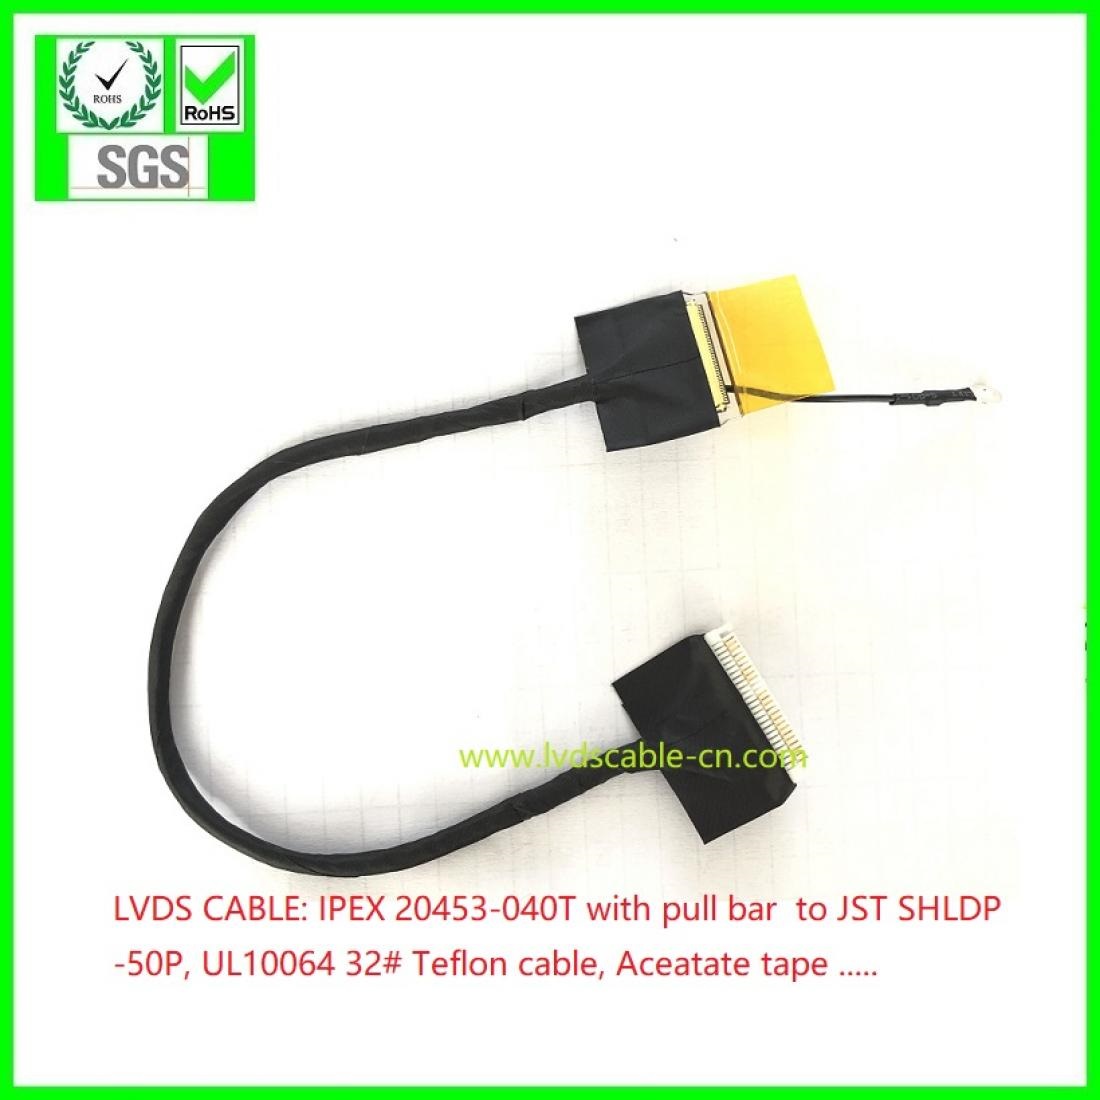 LVDS Kable, LCD cable, ipex 20453-040T and JST SHLDP-50P, UL10064 32# Teflon